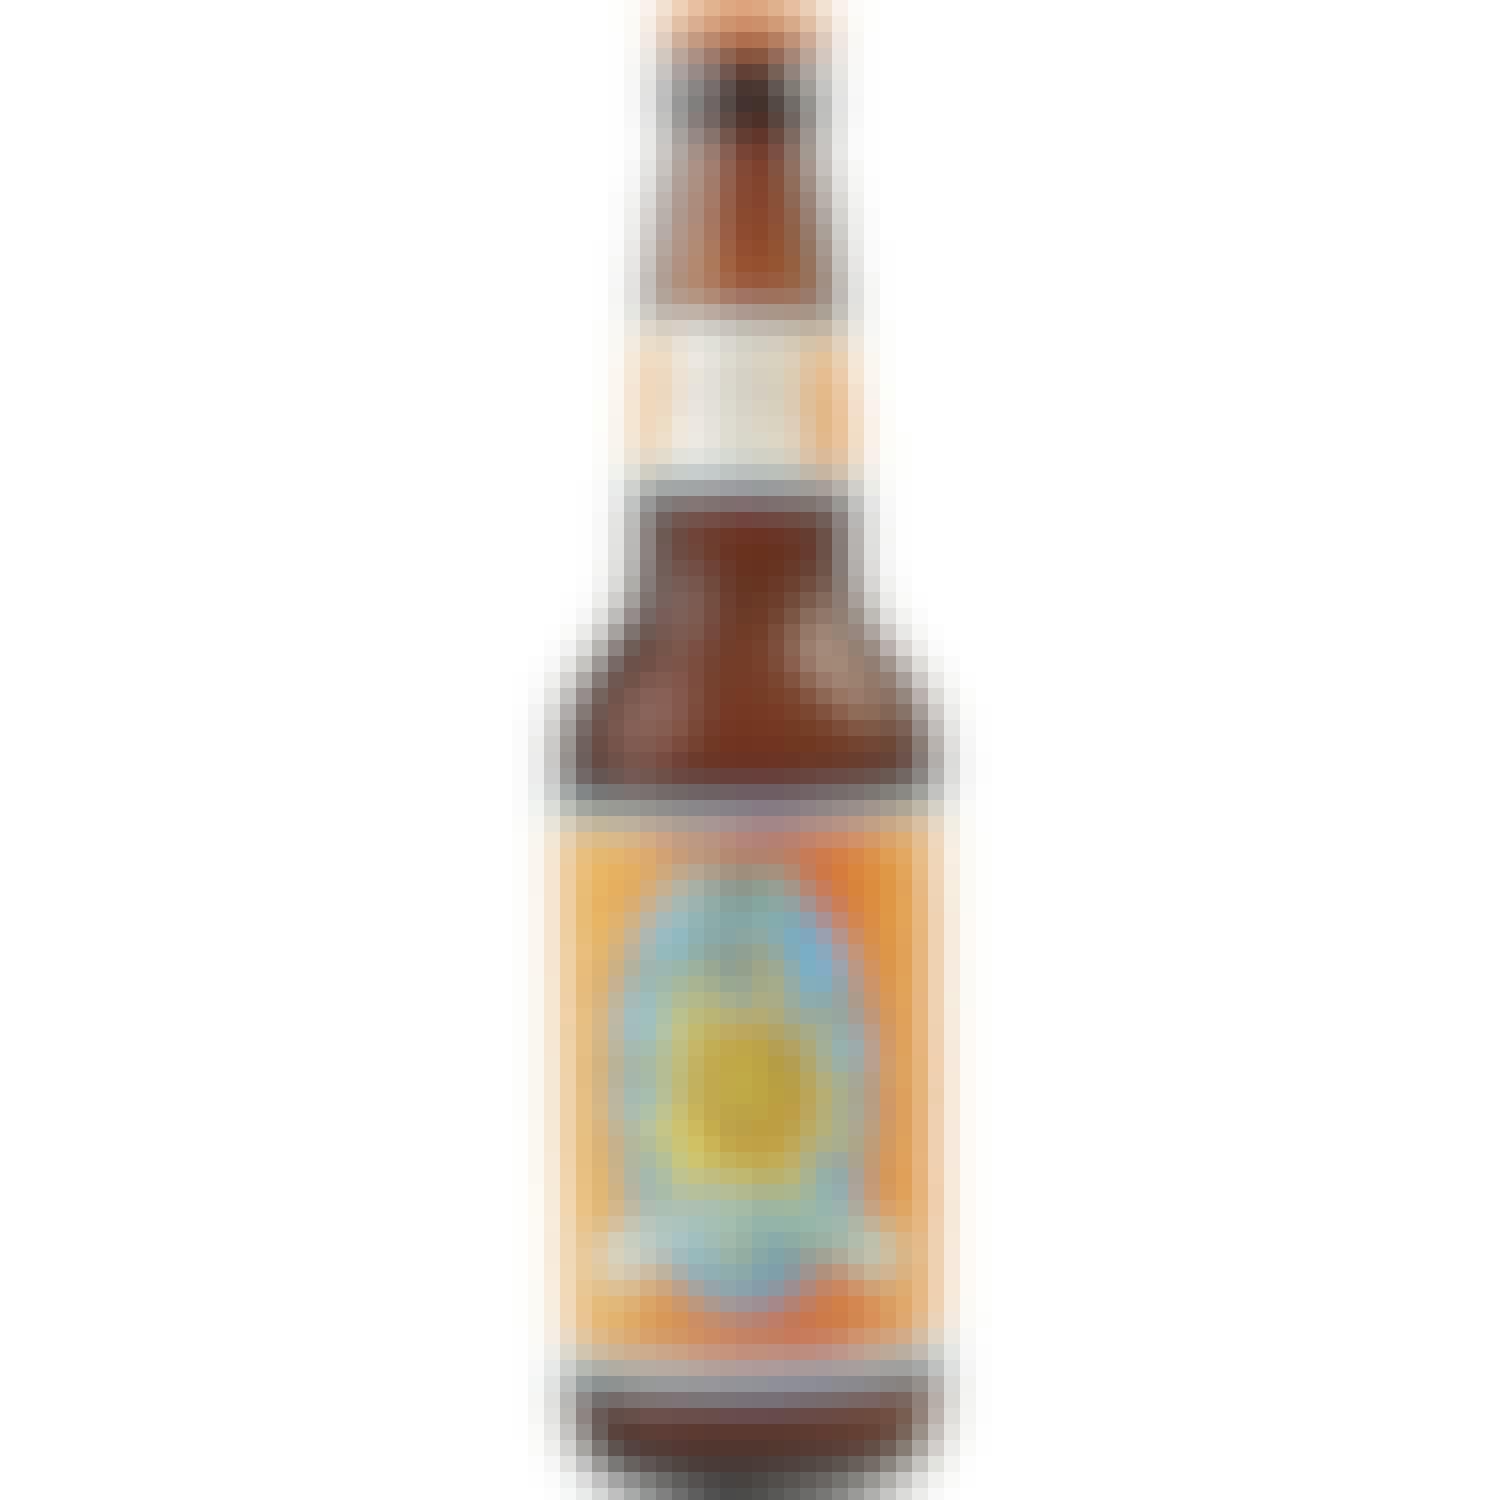 Bell's Brewery Oberon Pale Wheat Ale Bottle